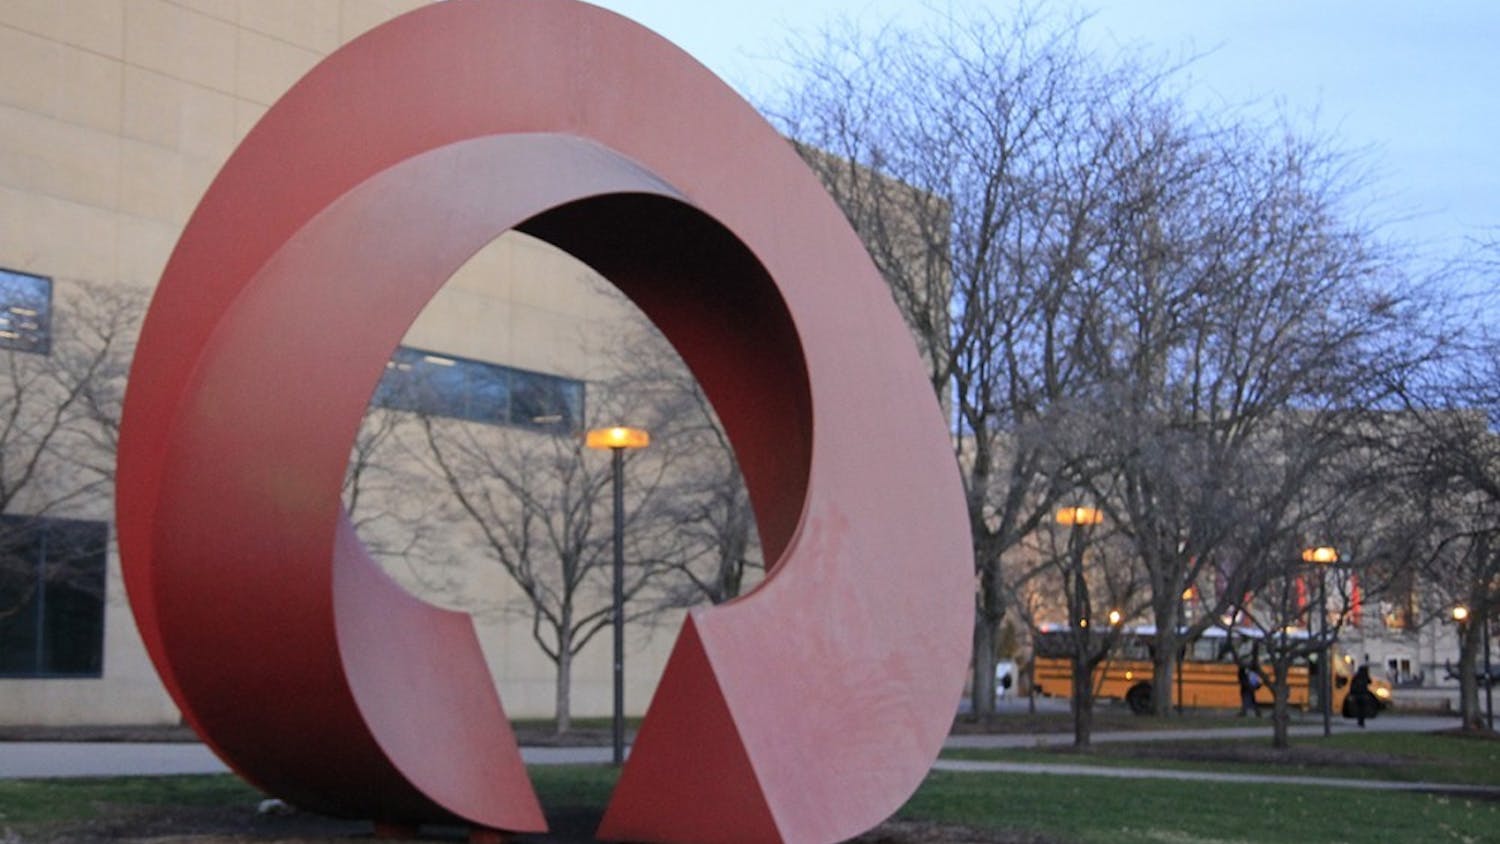 The Indiana Arc, outside the Eskenazi Art Museum of Art, was built in 1995. It is made of aluminum and was built by Charles Perry, an American sculptor known for his large public sculptures.